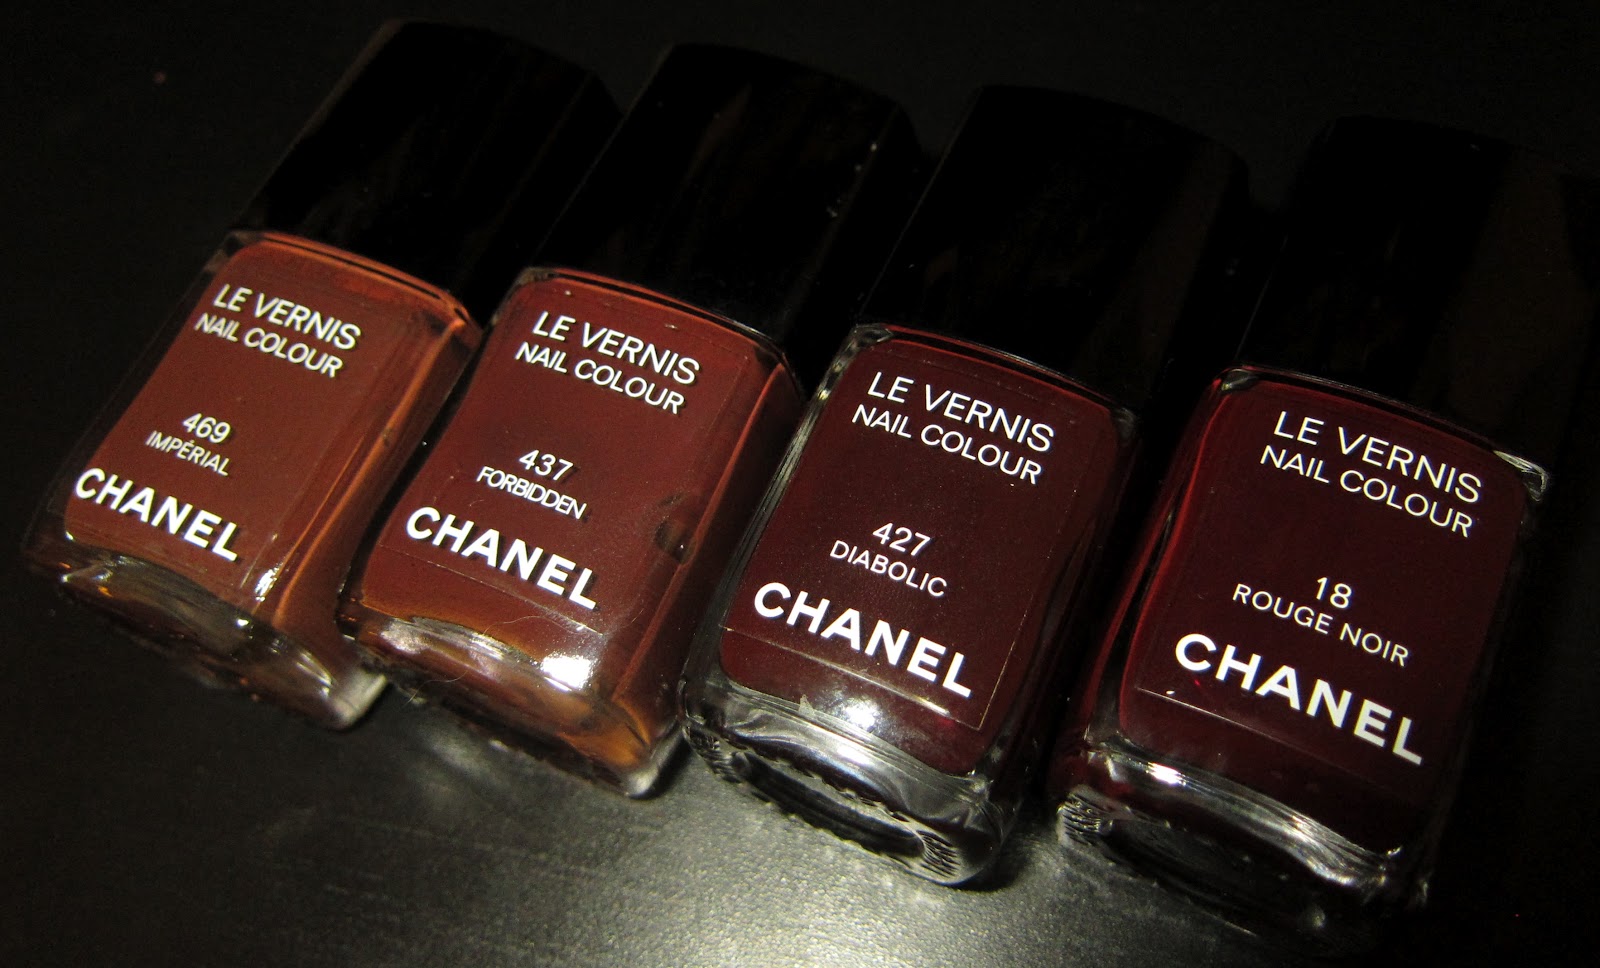 Chanel Forbidden, Diabolic, Vamp, Rouge Noir and Some Other